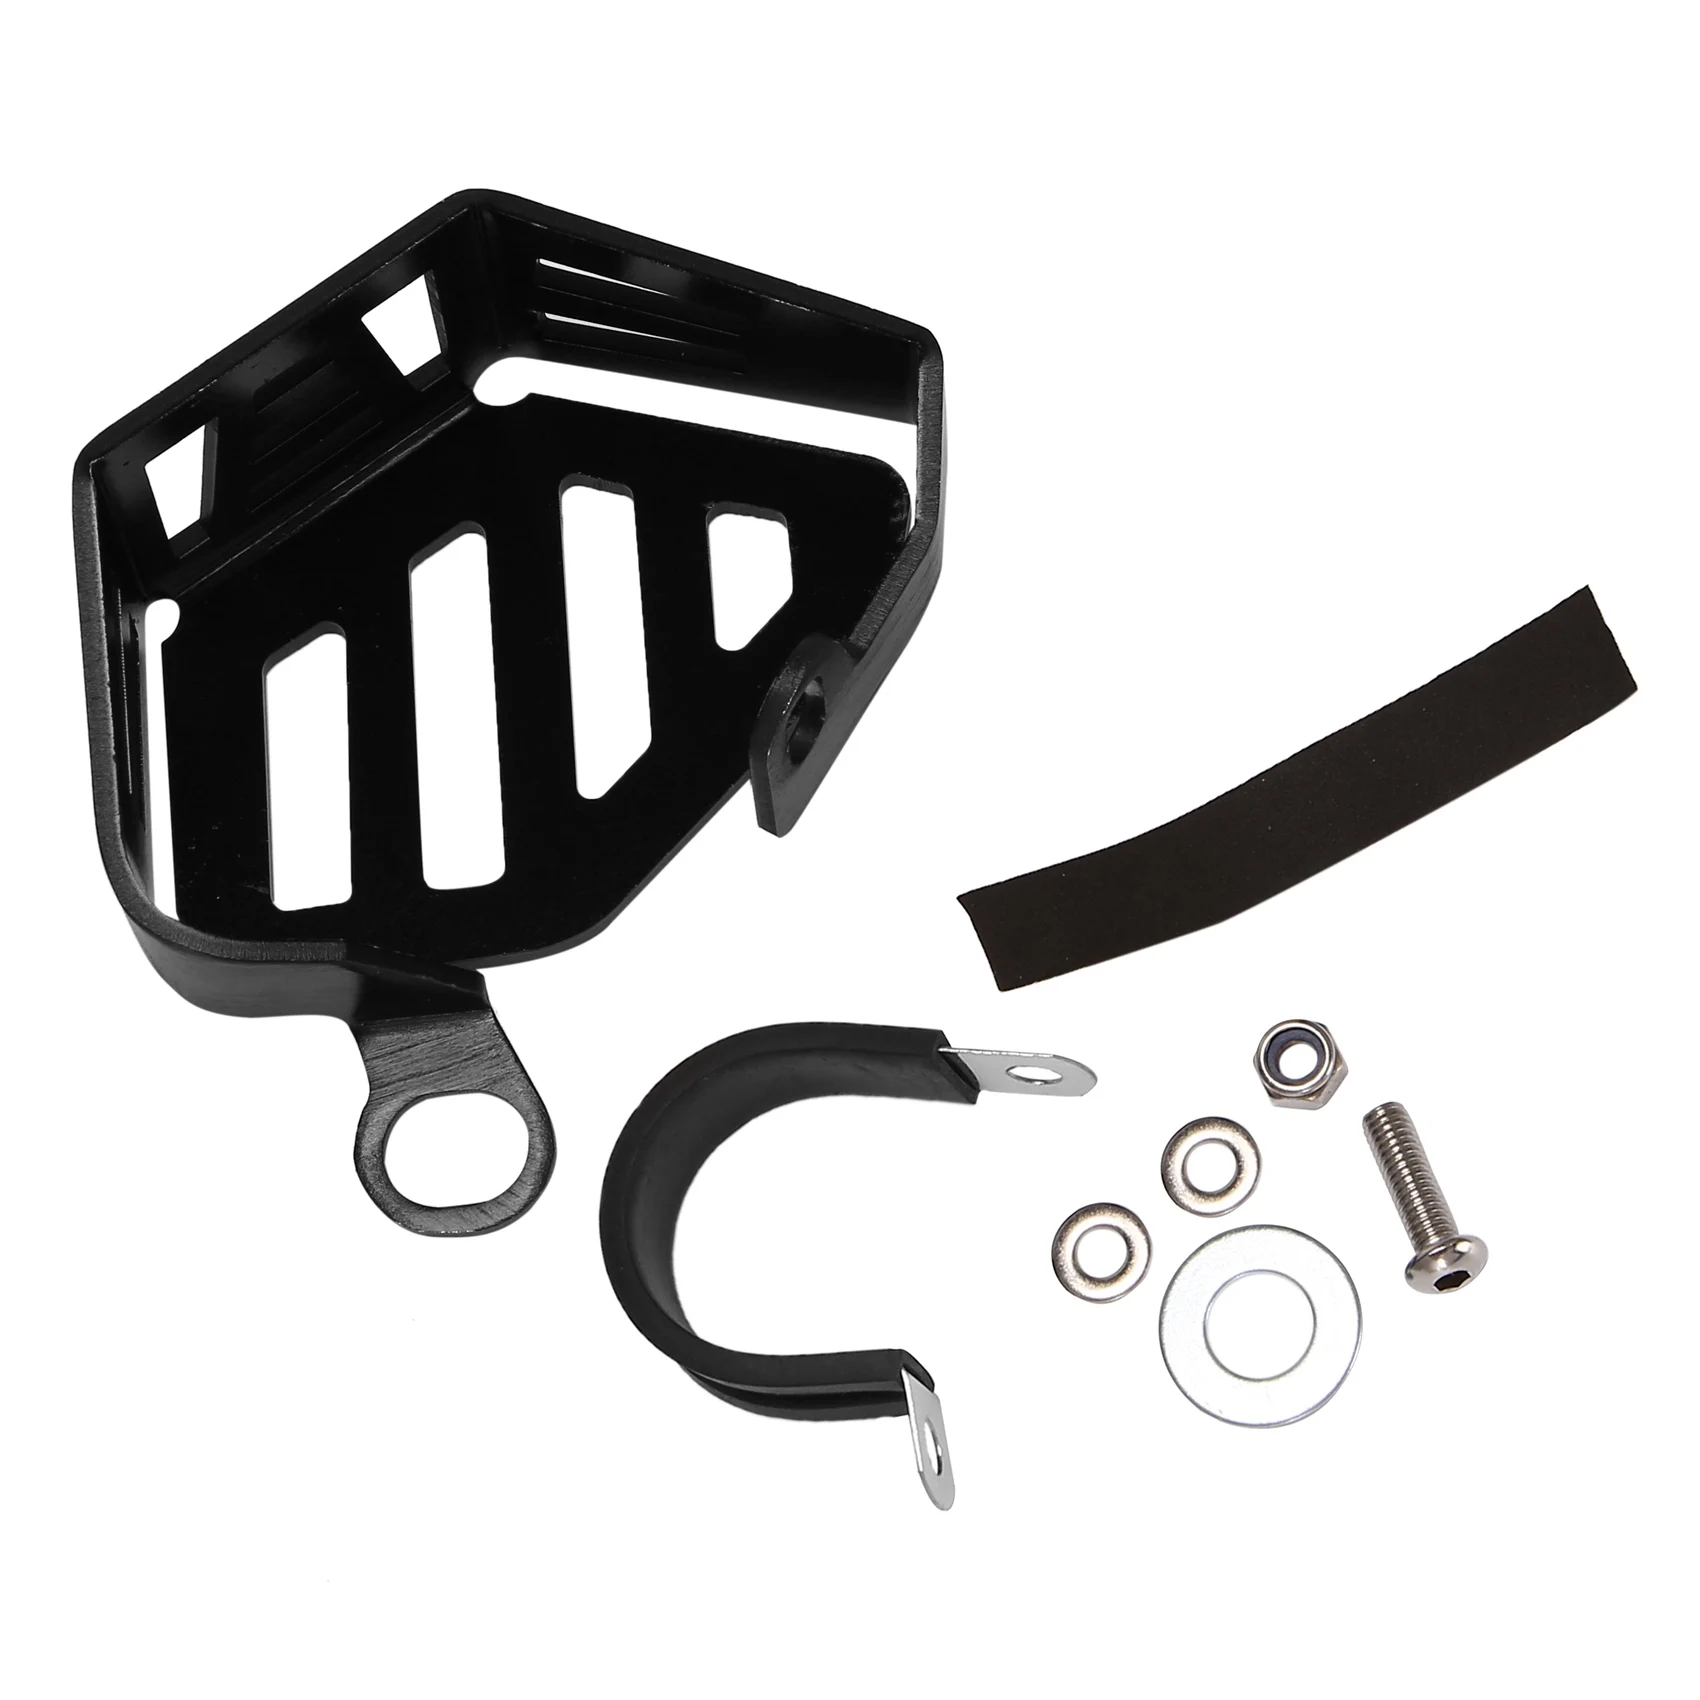 

Black Front Brake Reservoir Clutch Oil Cup Guard Protector Cover For-BMW R1200GS R1250GS Adv R Nine